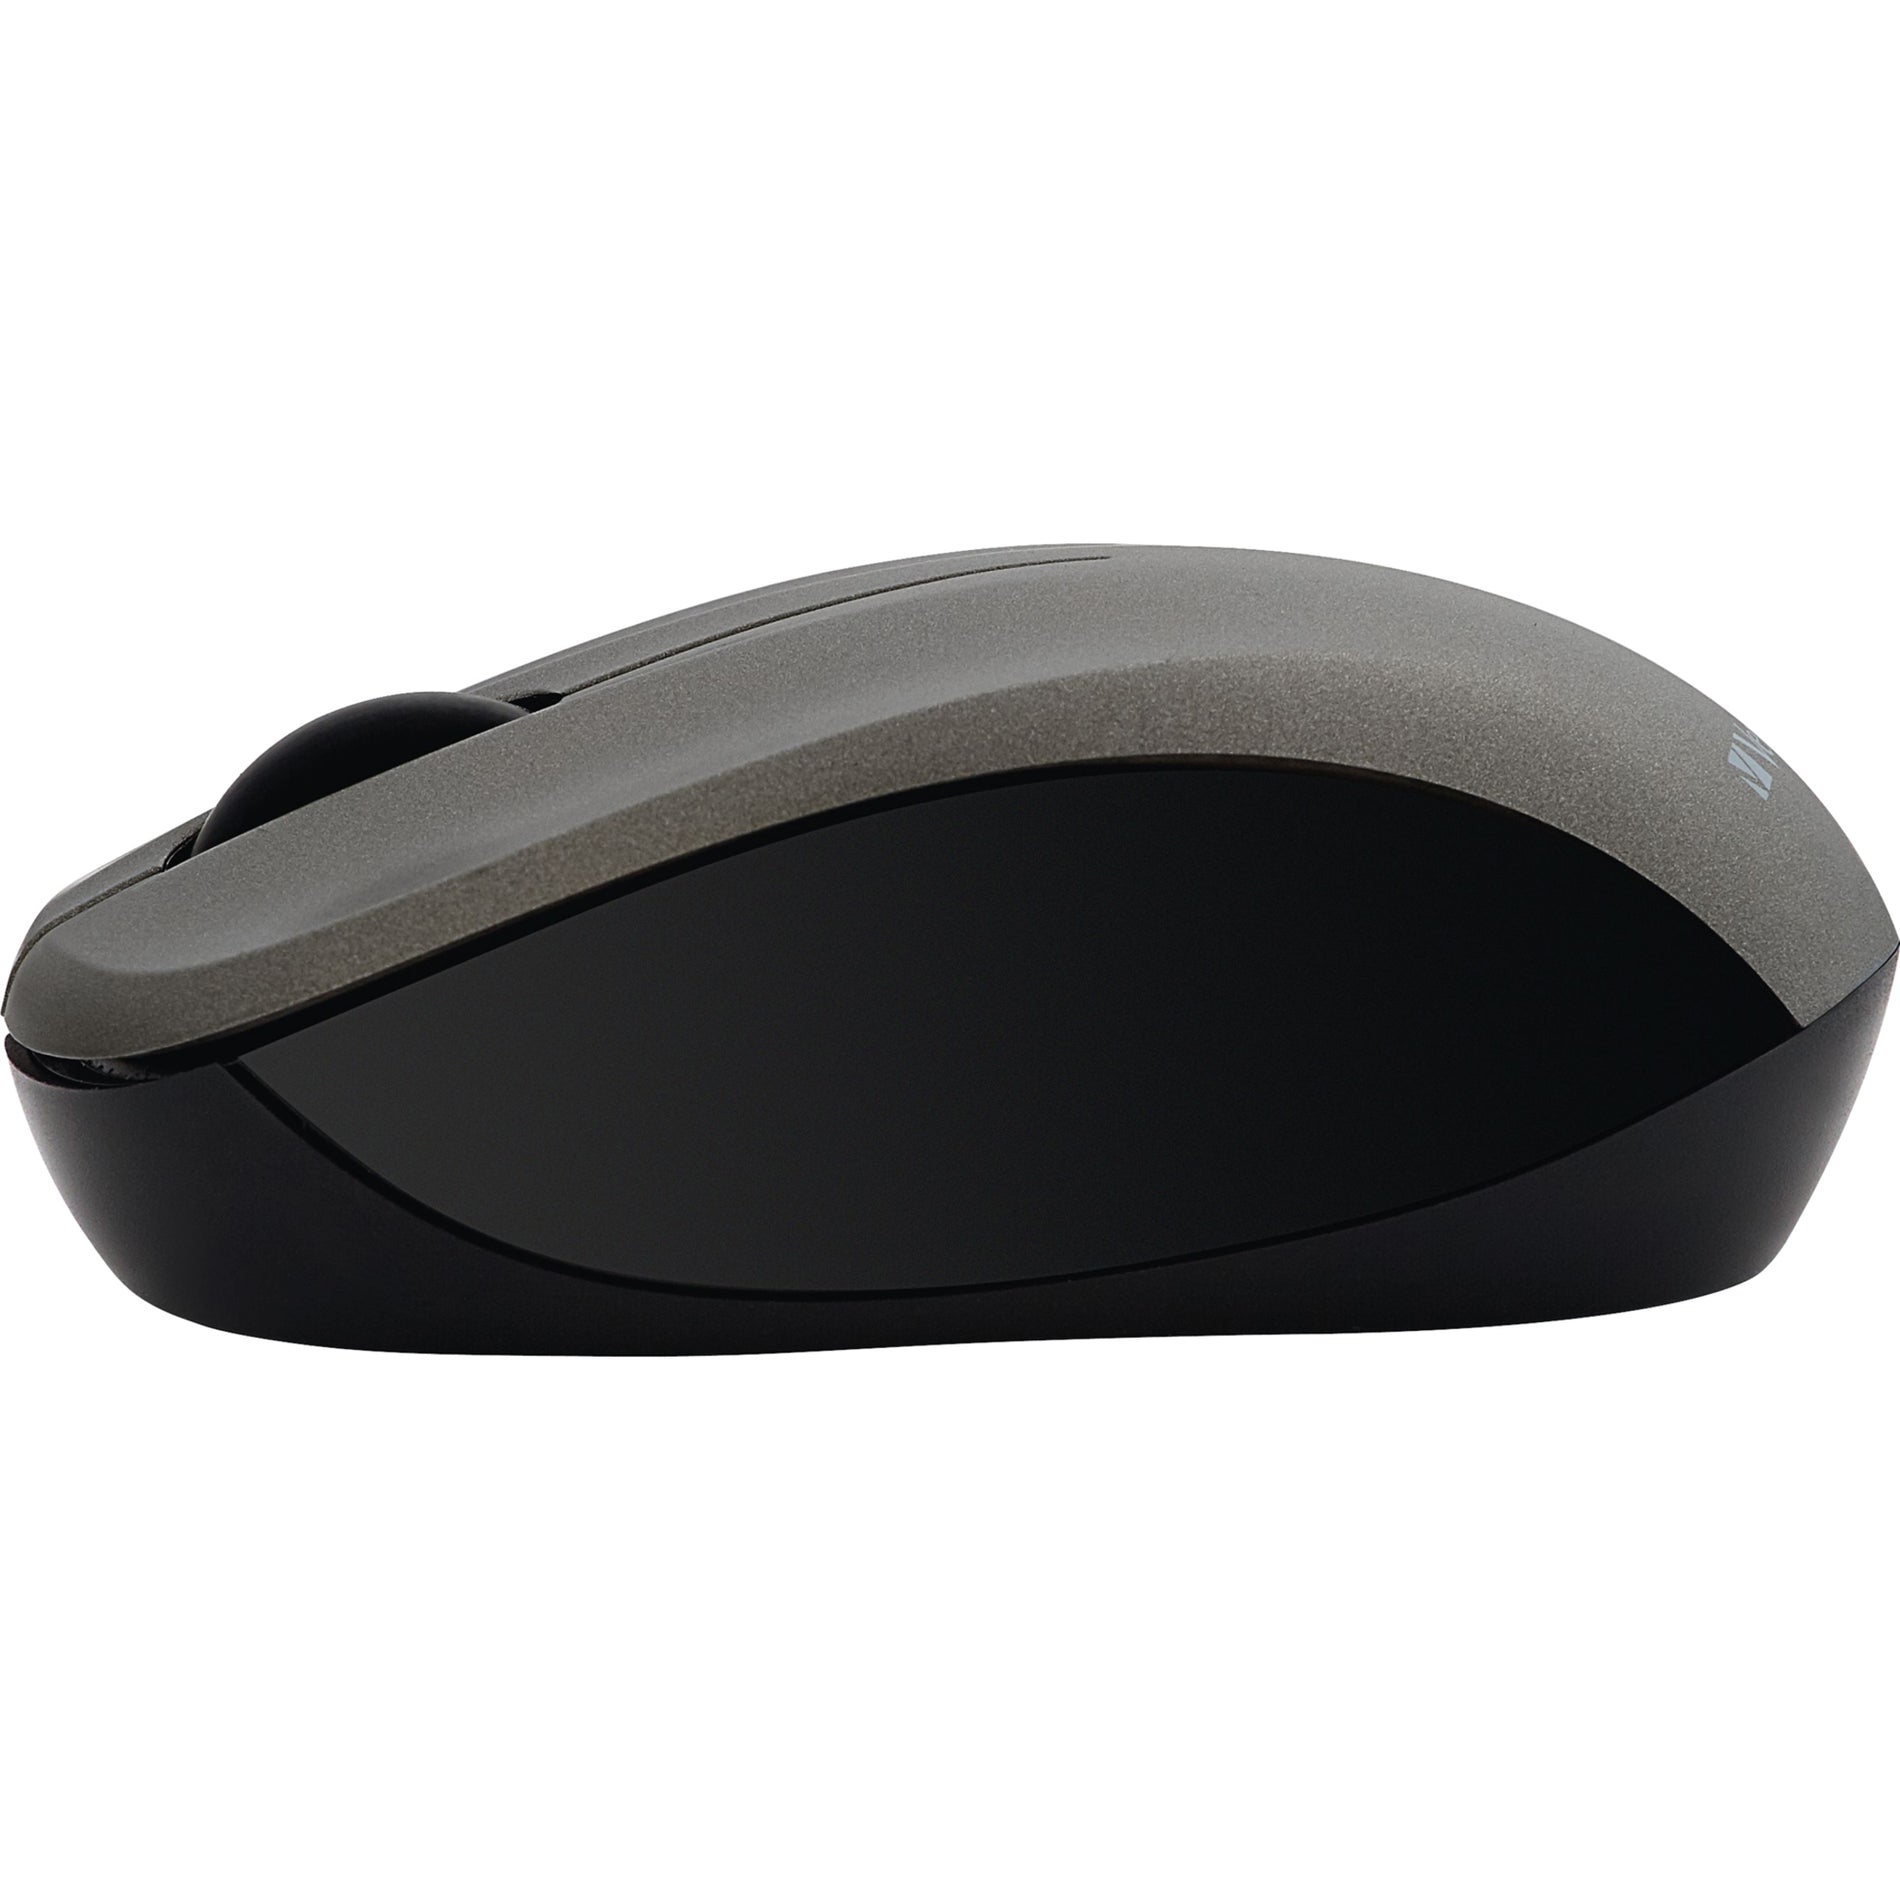 Verbatim 99769 Silent Wireless Blue LED Mouse - Graphite, Radio Frequency, USB Type A